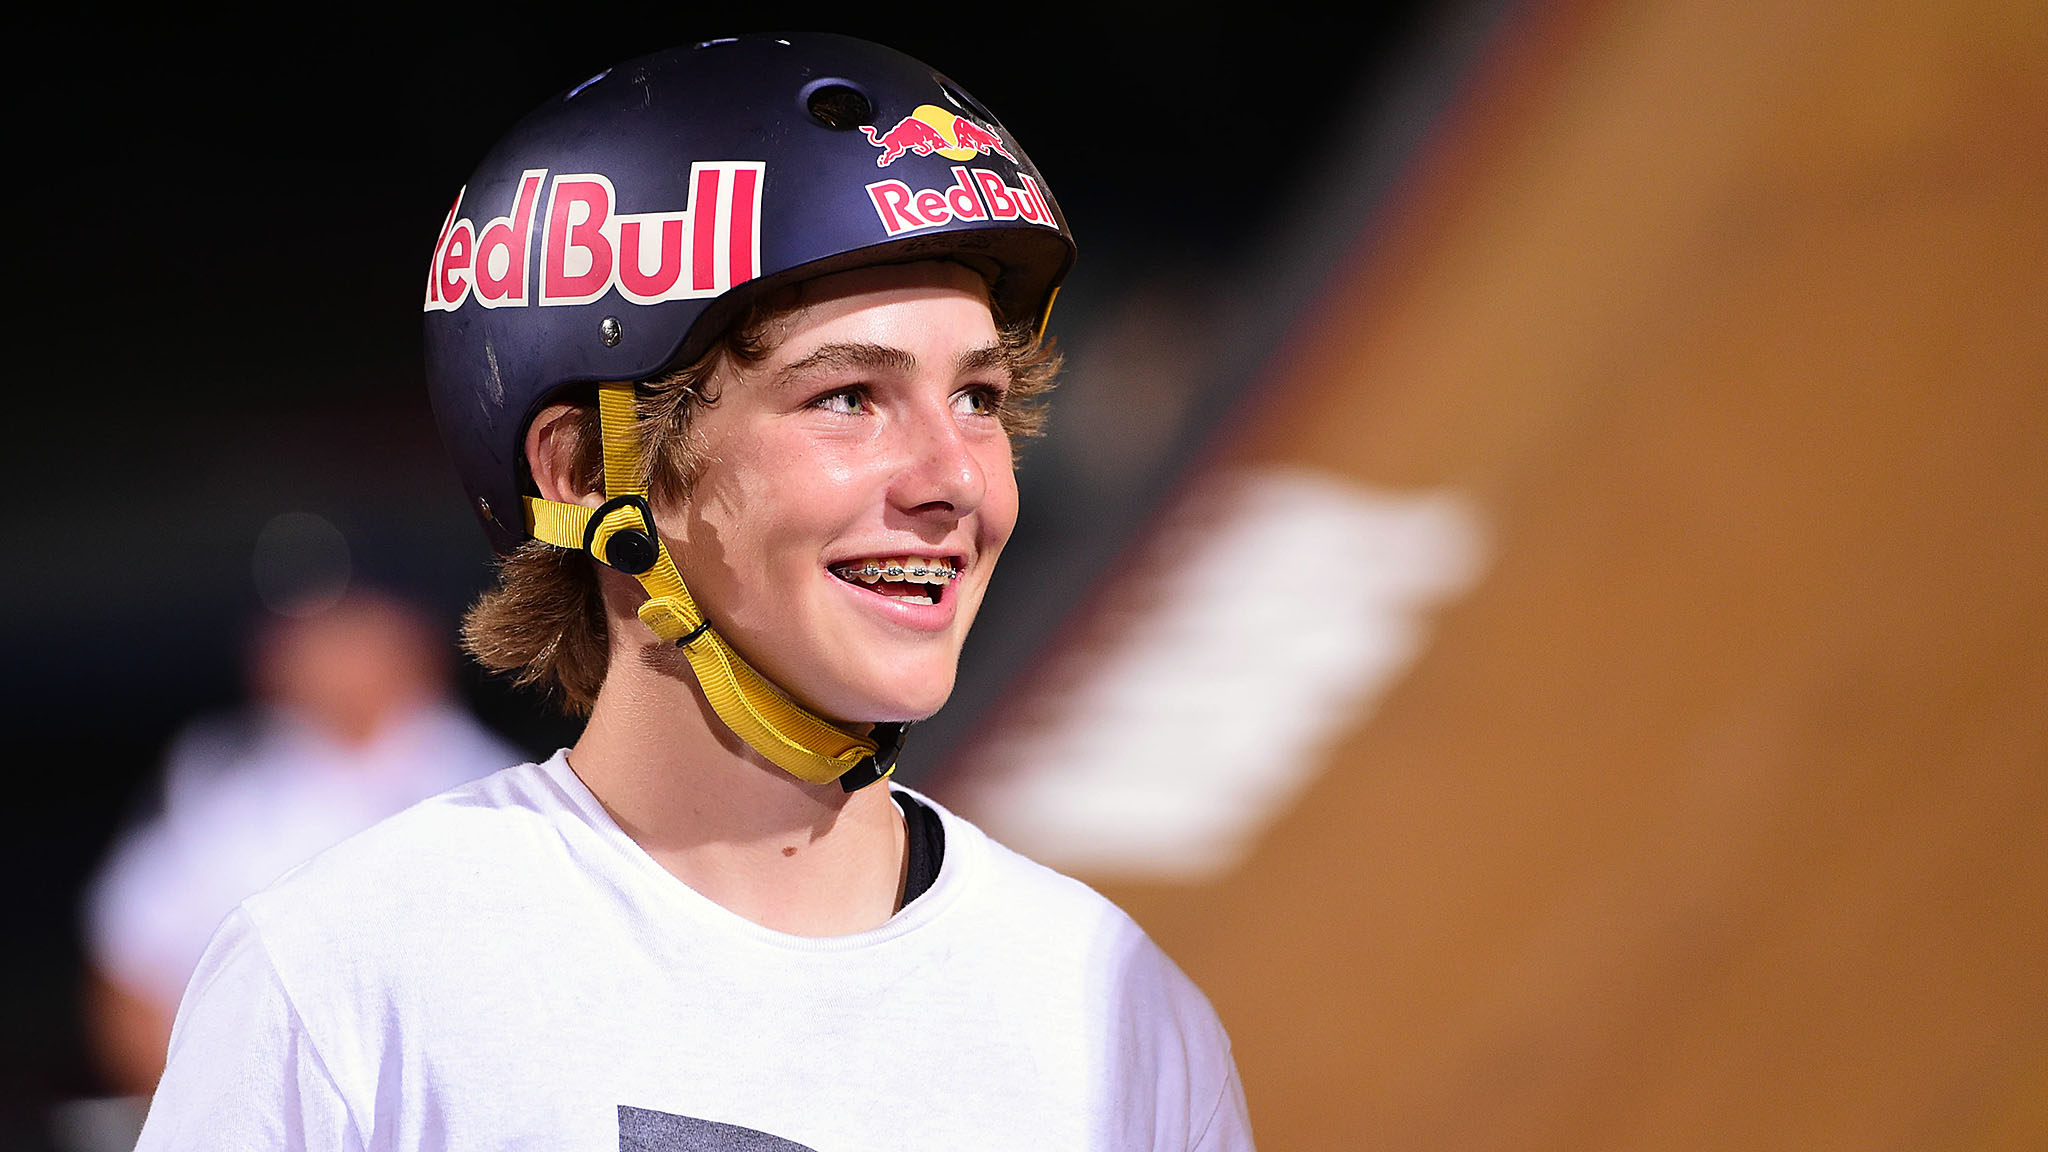 Schaar made his X Games debut in 2012 when he was just 12, and he's been hailed as the future of Big Air and Vert skateboarding.